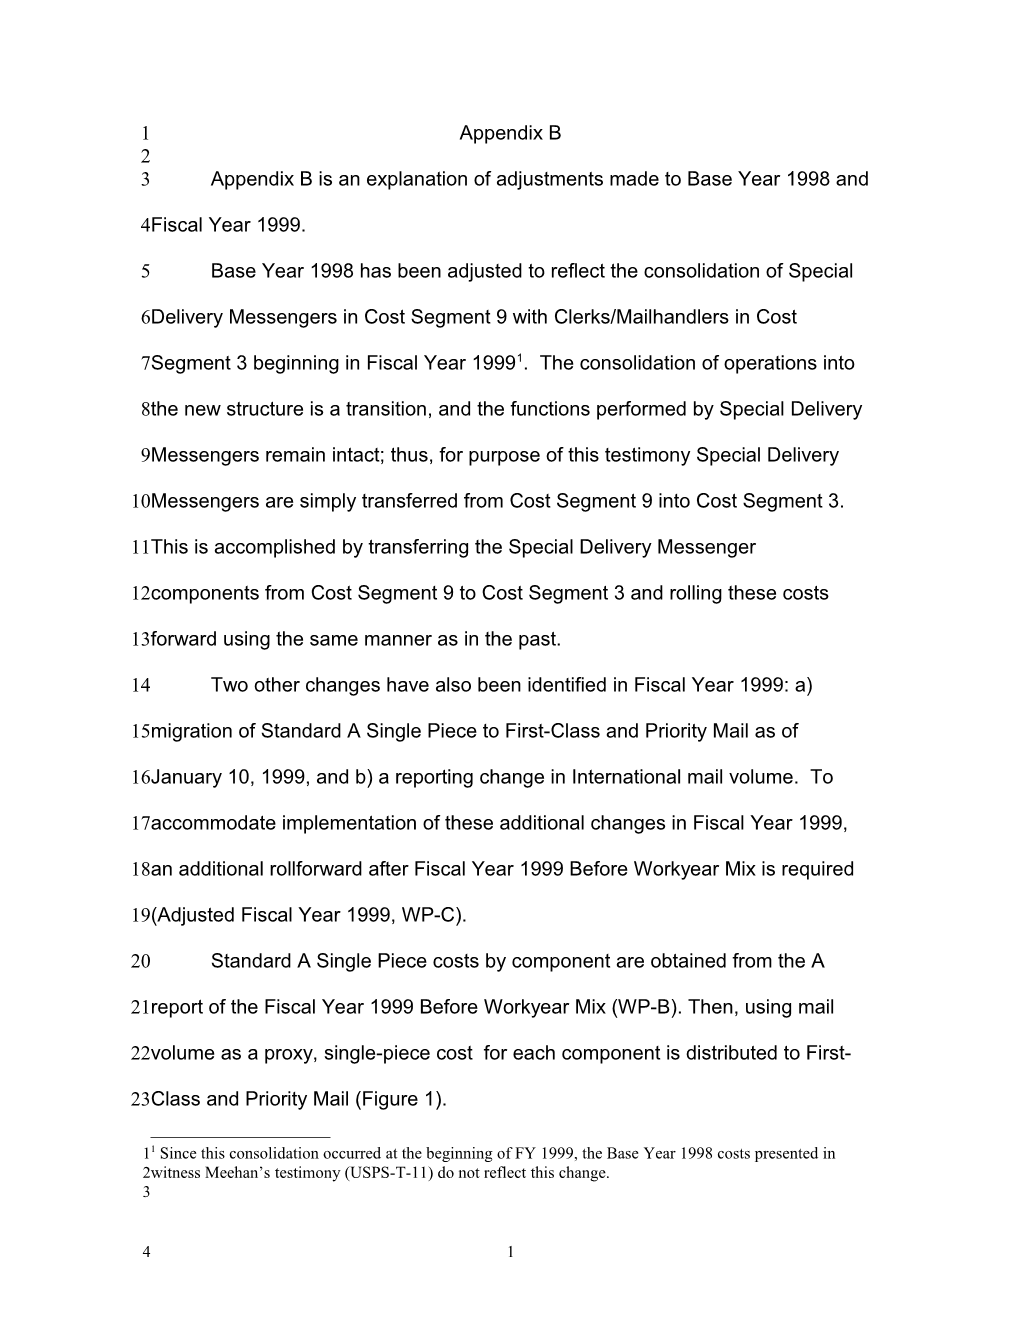 Appendix B Is an Explanation of Adjustments Made to Base Year 1998 and Fiscal Year 1999